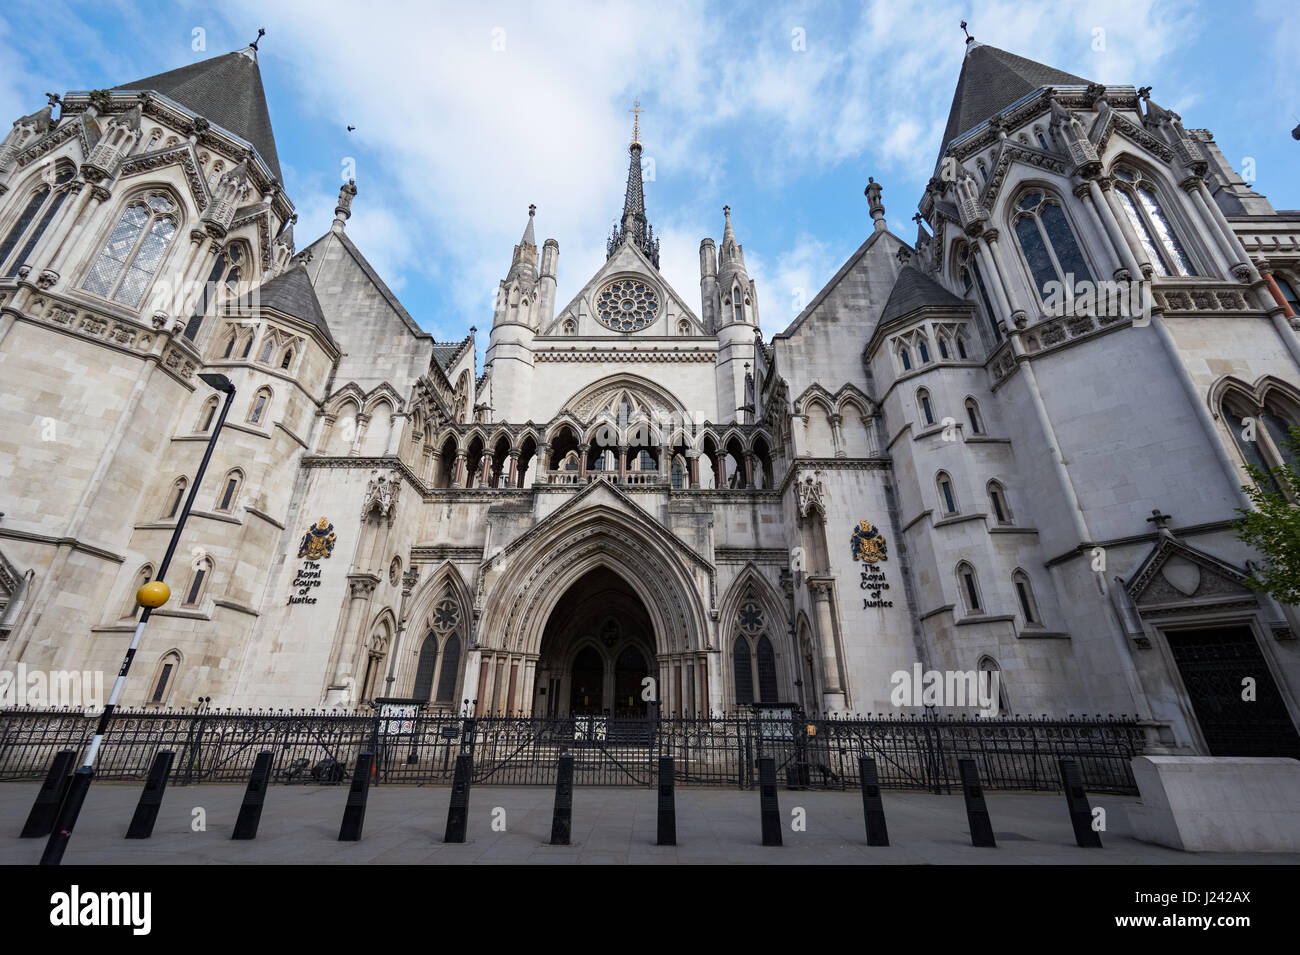 The Royal Courts of Justice on Strand, London, UK Stock Photo